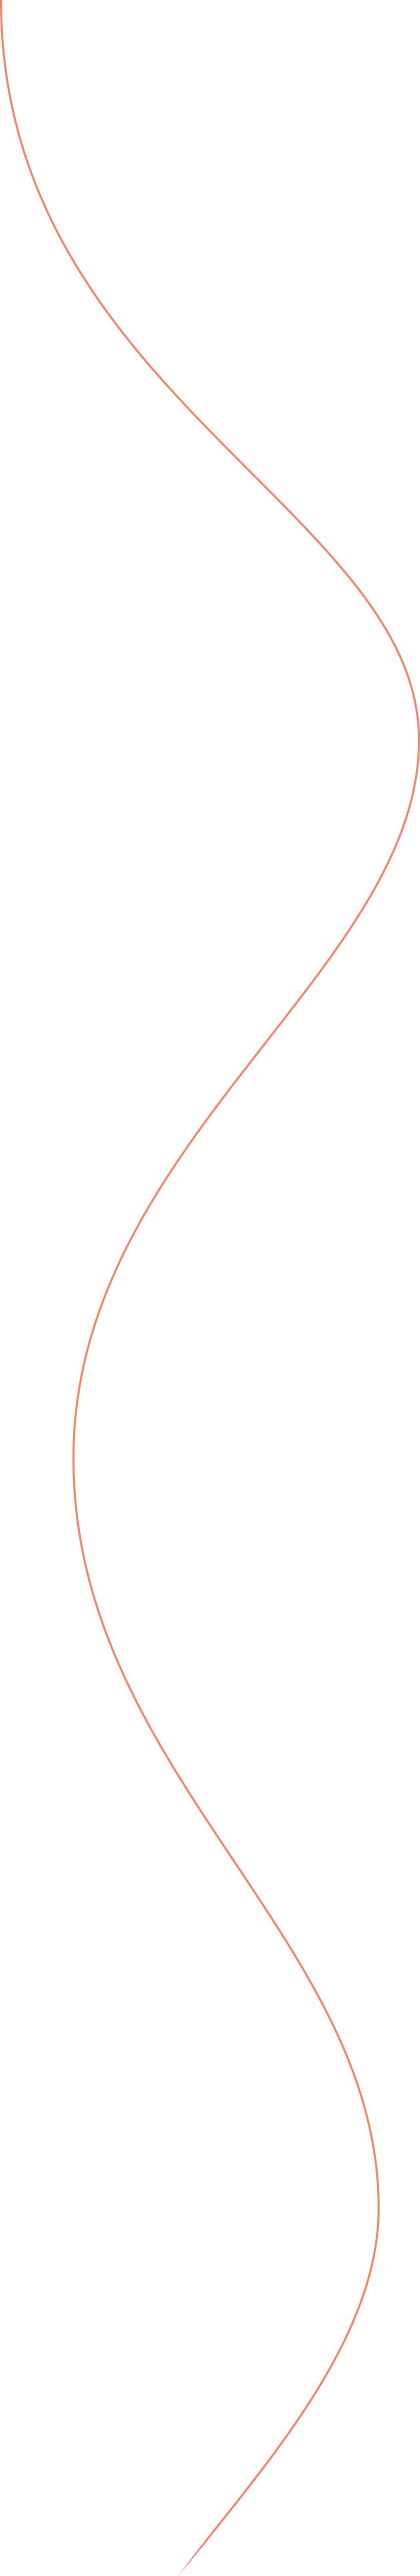 Red curved line